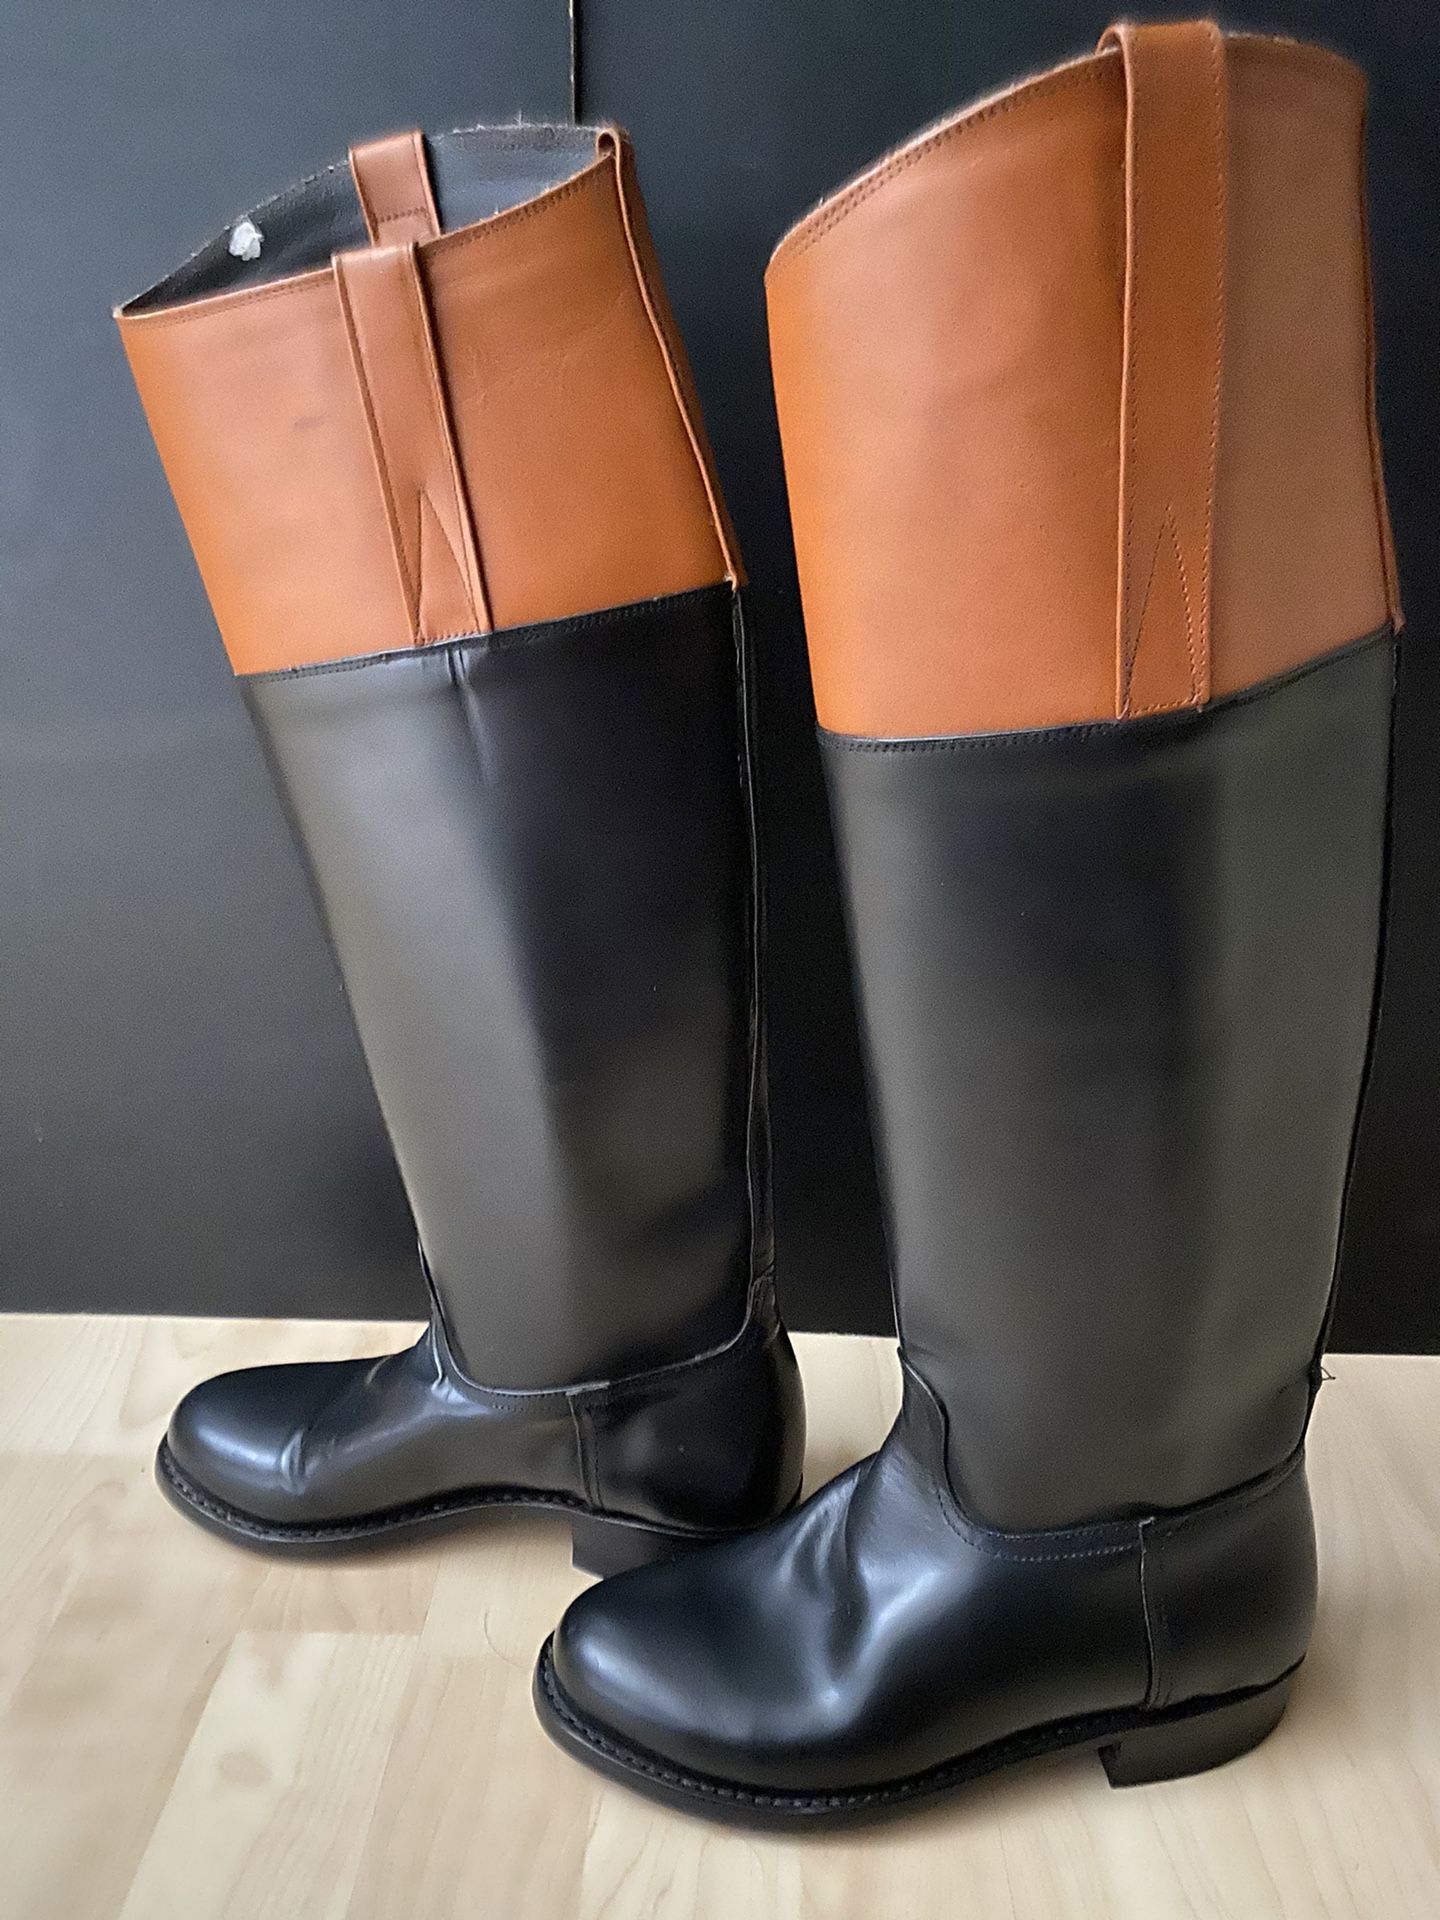 Brand new English riding boots Leather size 6